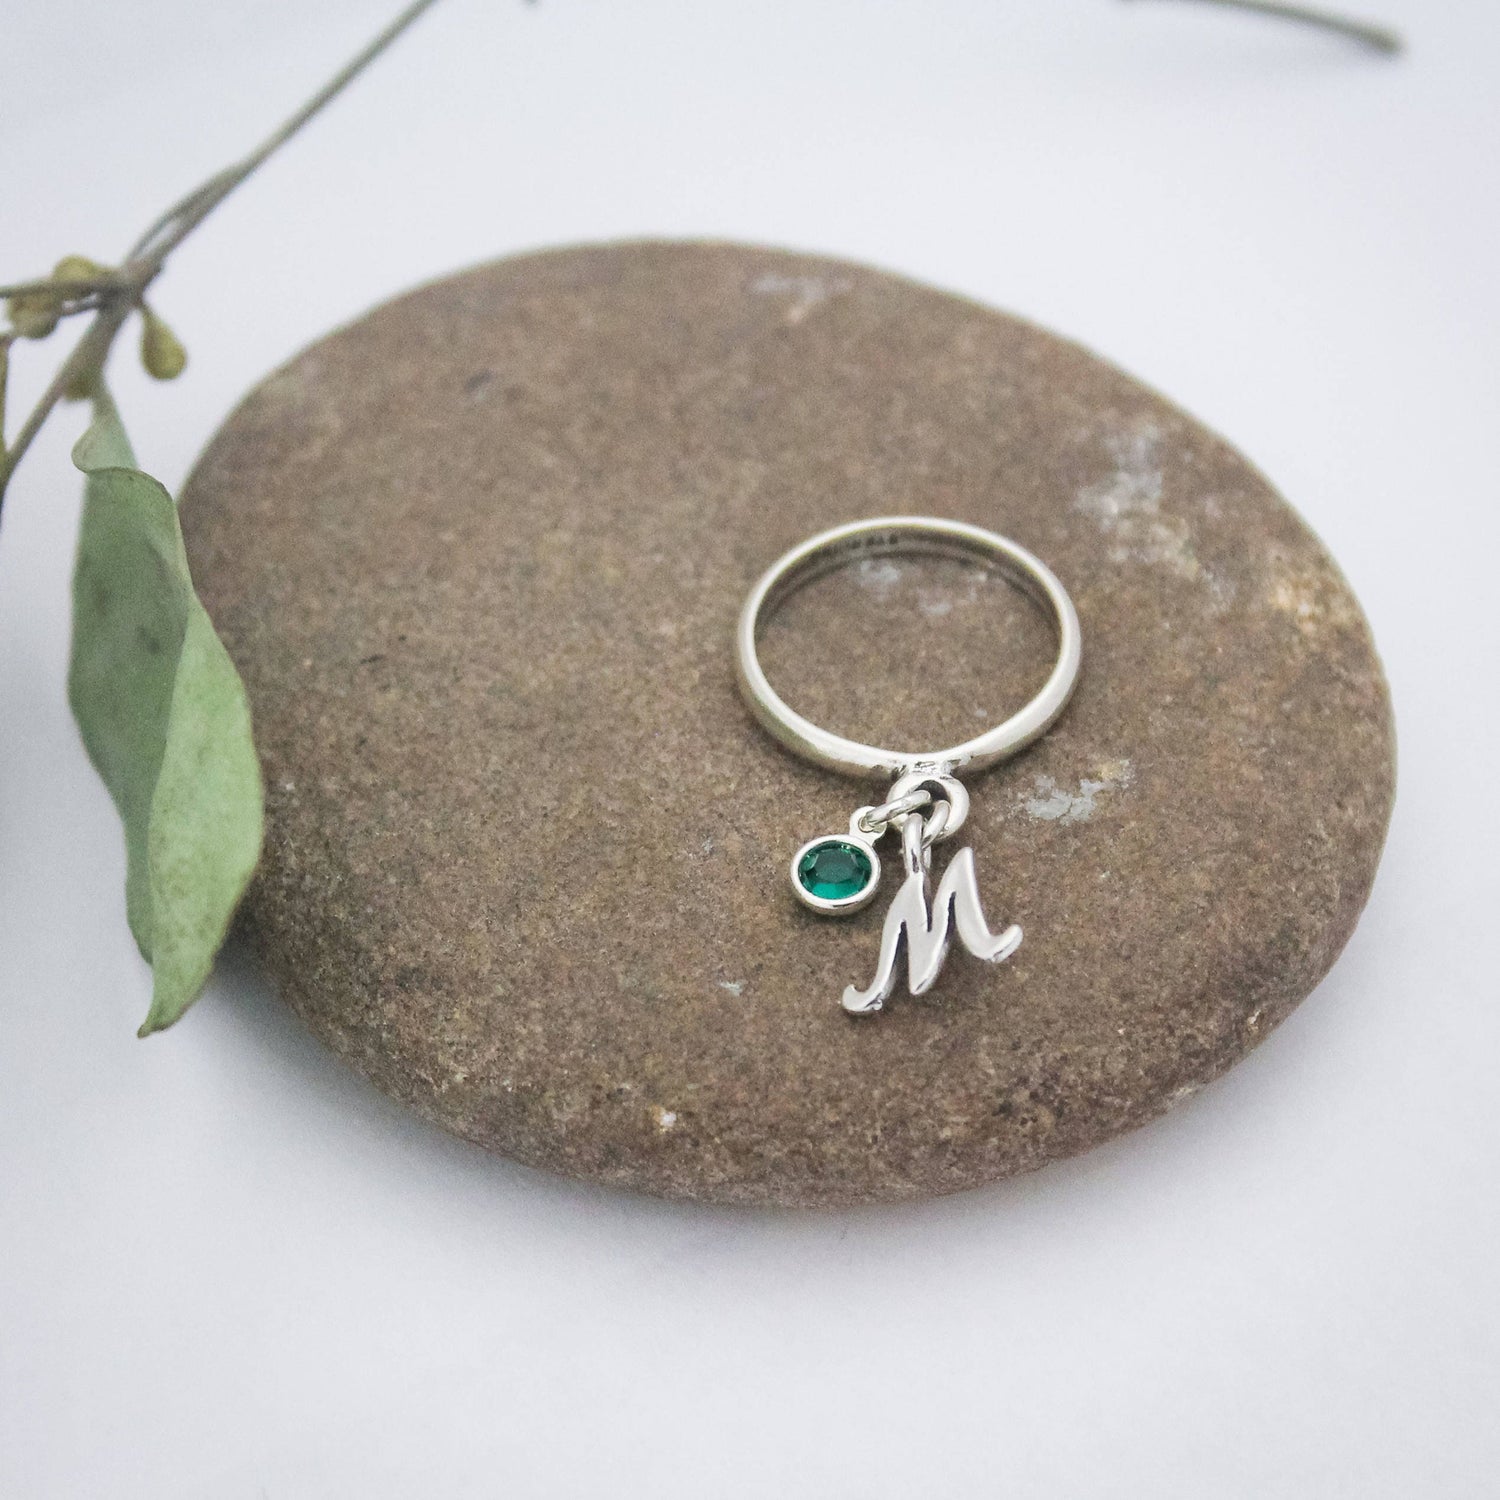 Initial Birthstone Charm Ring. Sterling Silver Charm Ring. Charm Dangle Ring. Personalized Jewelry. Gifts for Her. Mother's Day Gift